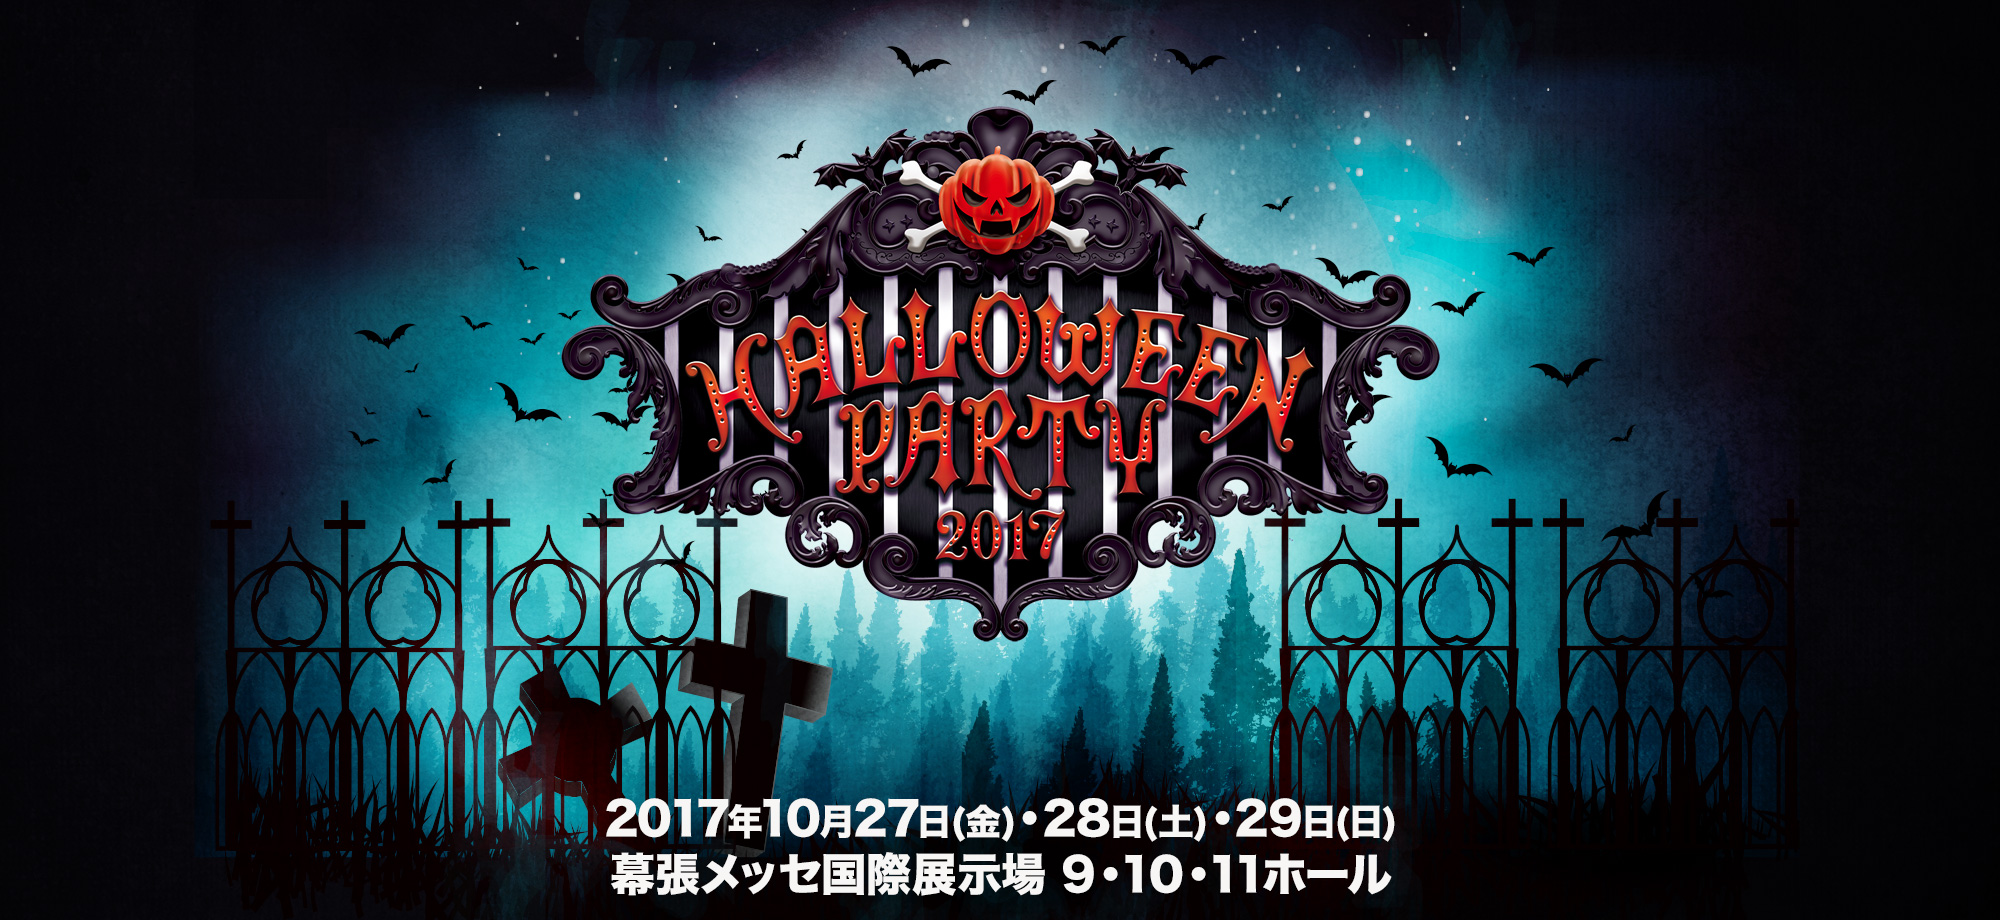 ＜Source：HALLOWEEN PARTY 2017 Official Website＞